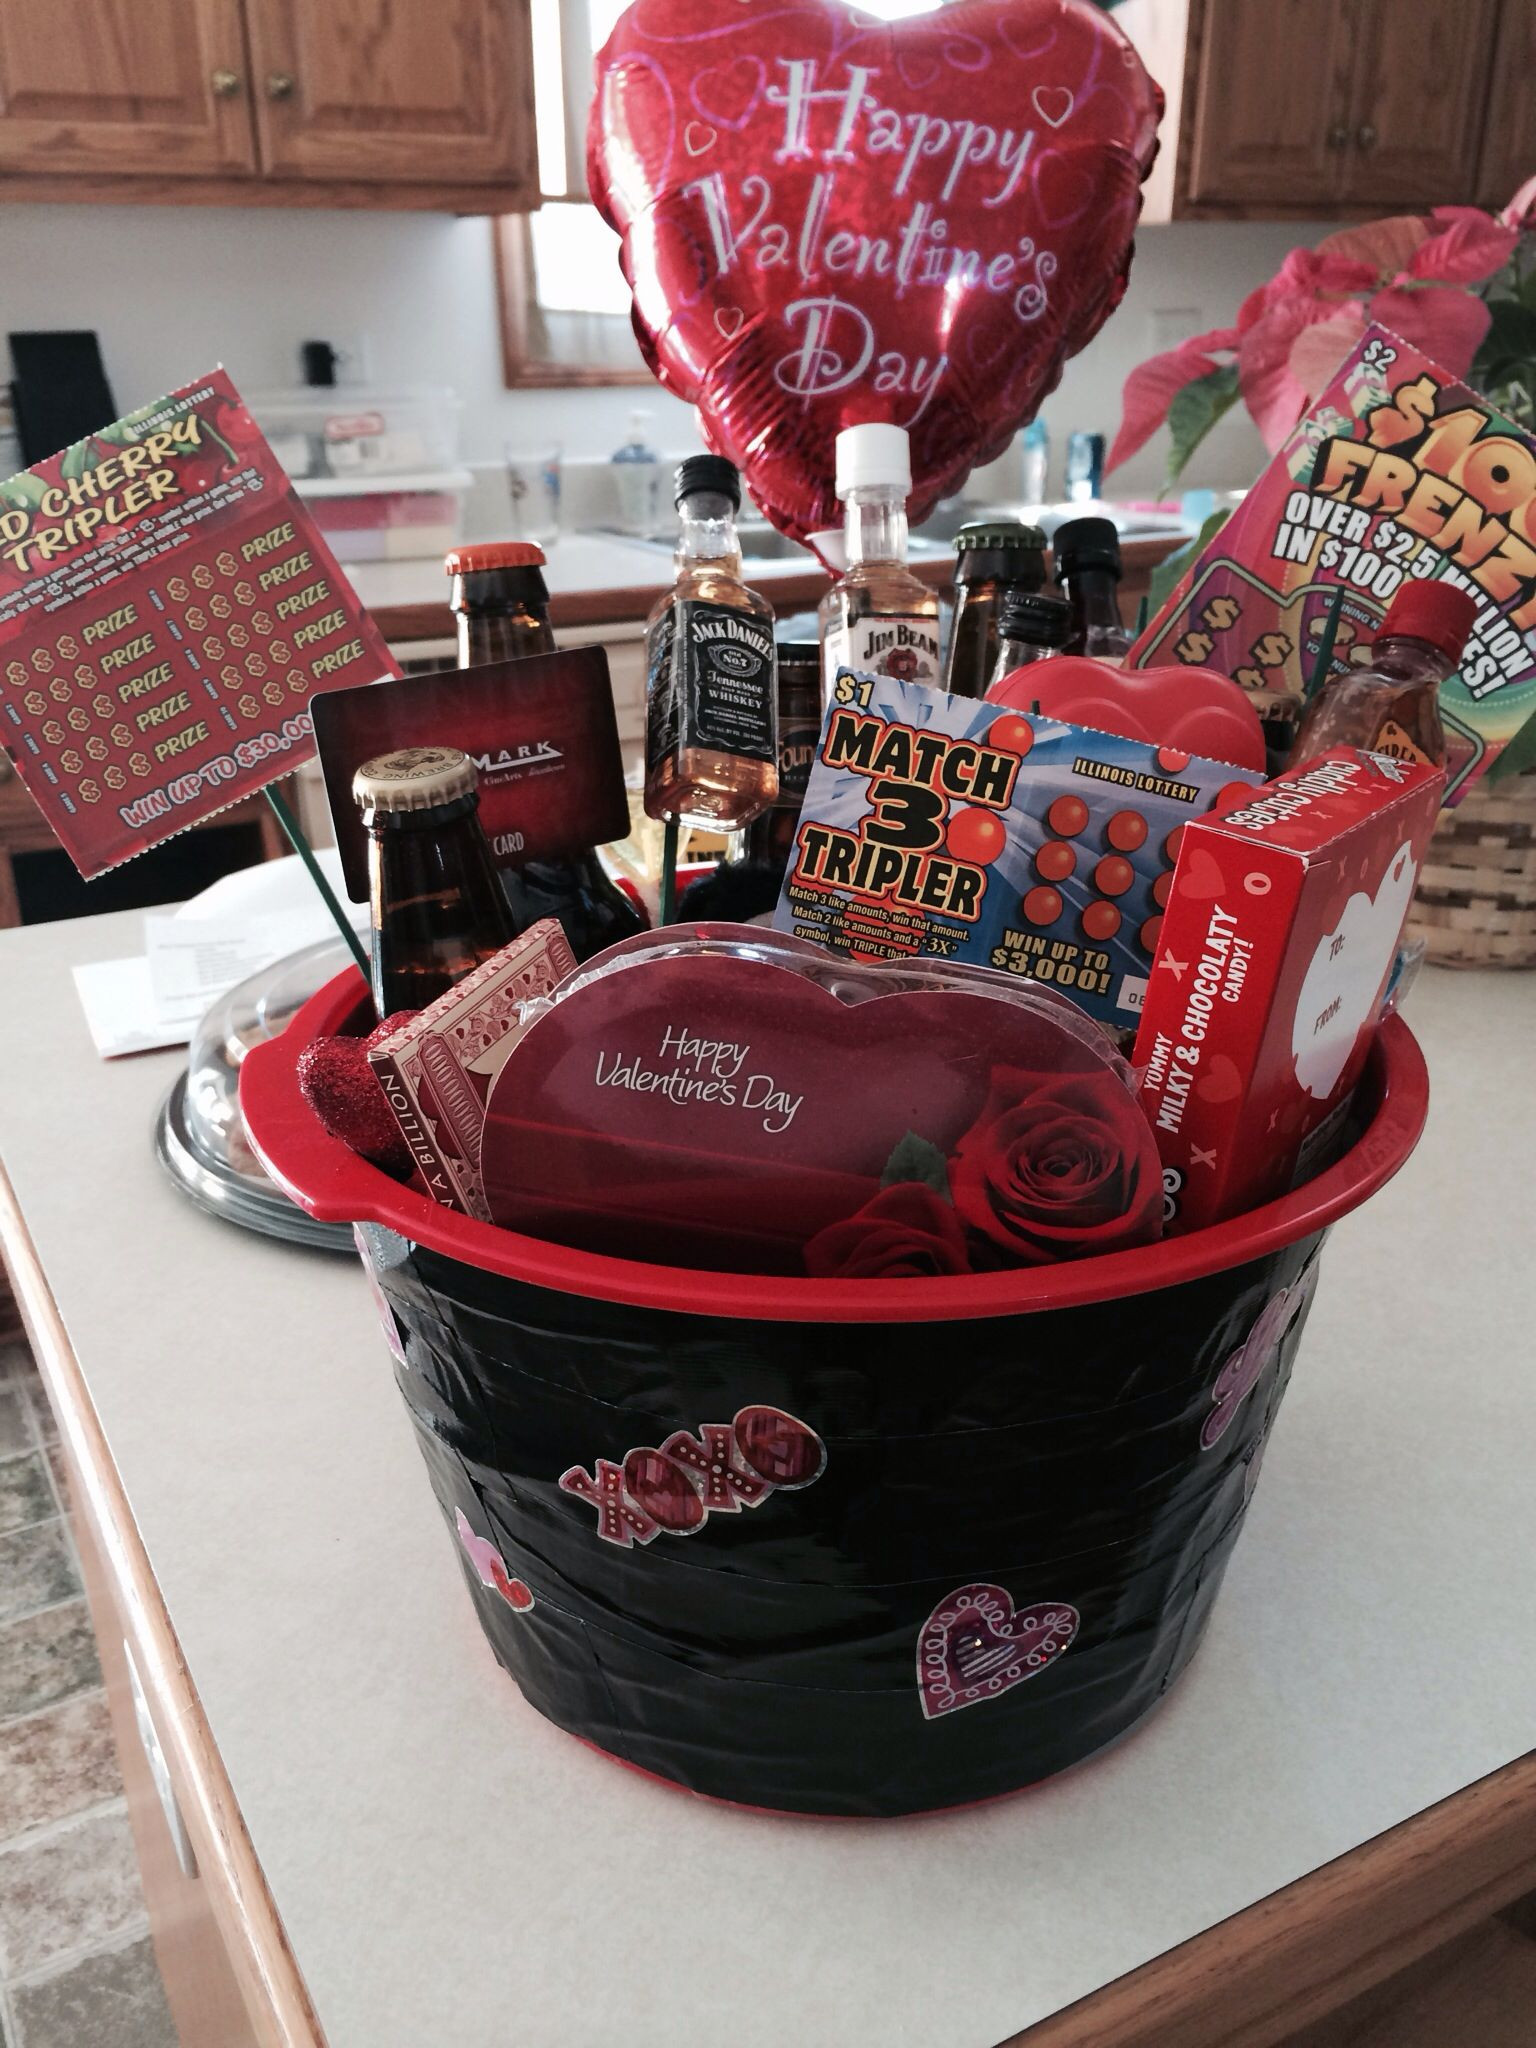 Valentines Day Ideas Gift Boyfriend
 Valentines day basket for him I used 6 IPA beers